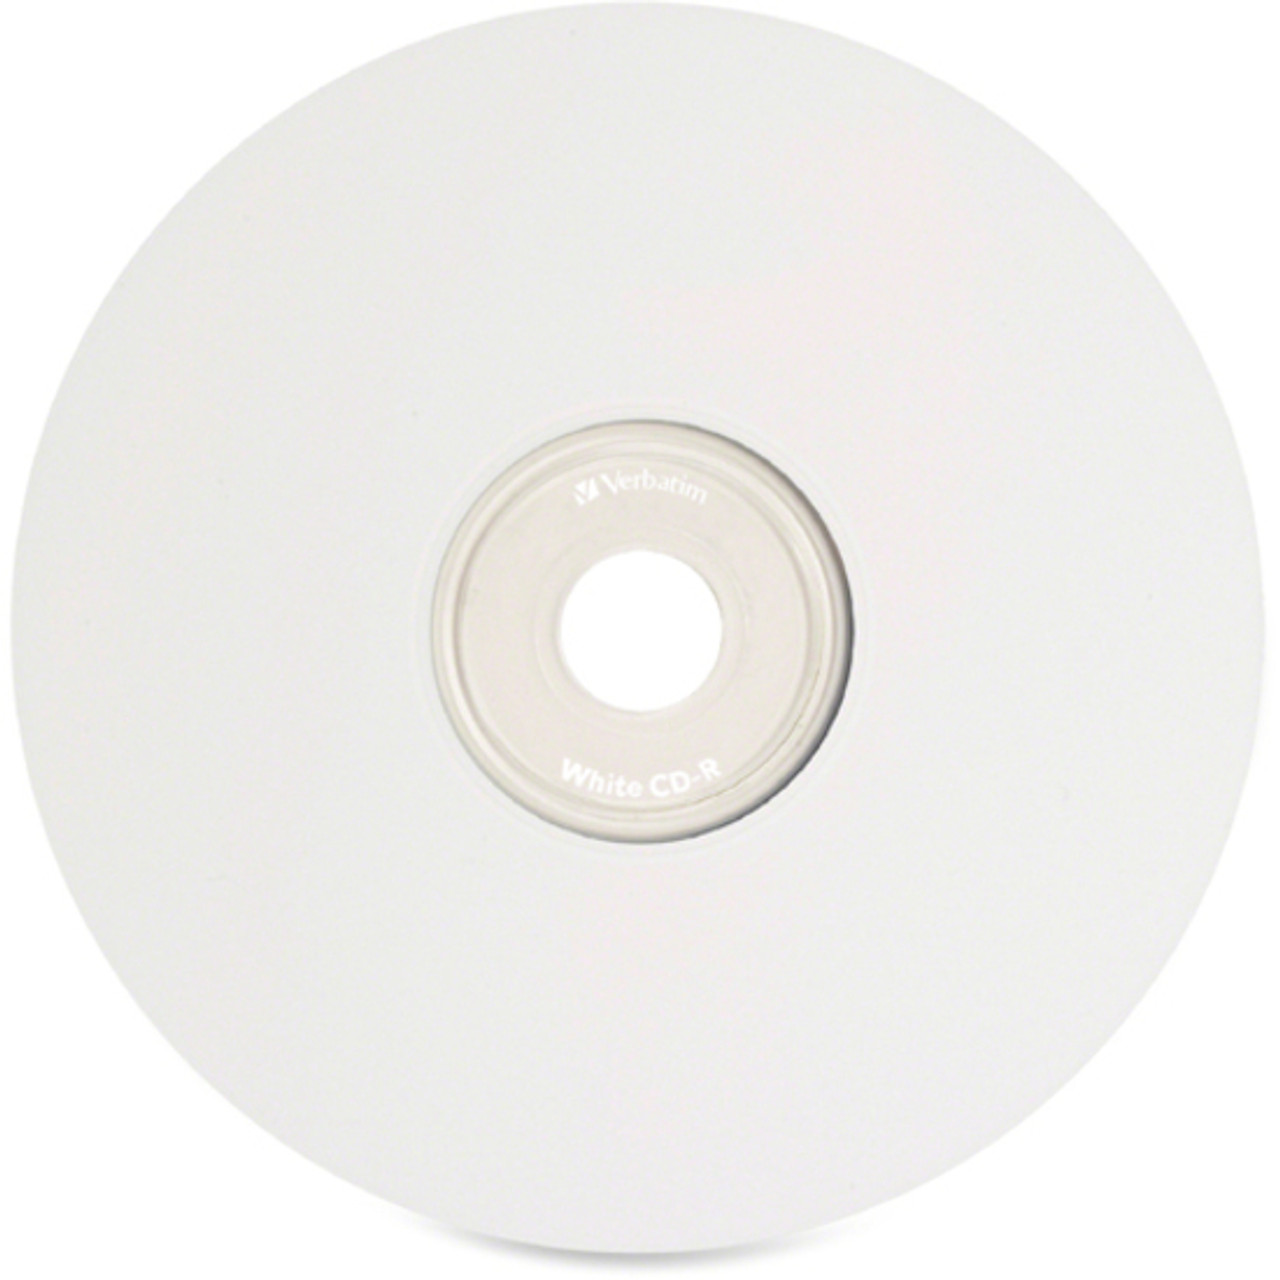 120 mm recordable compact disc (CD-R) with a capacity of 700 MB